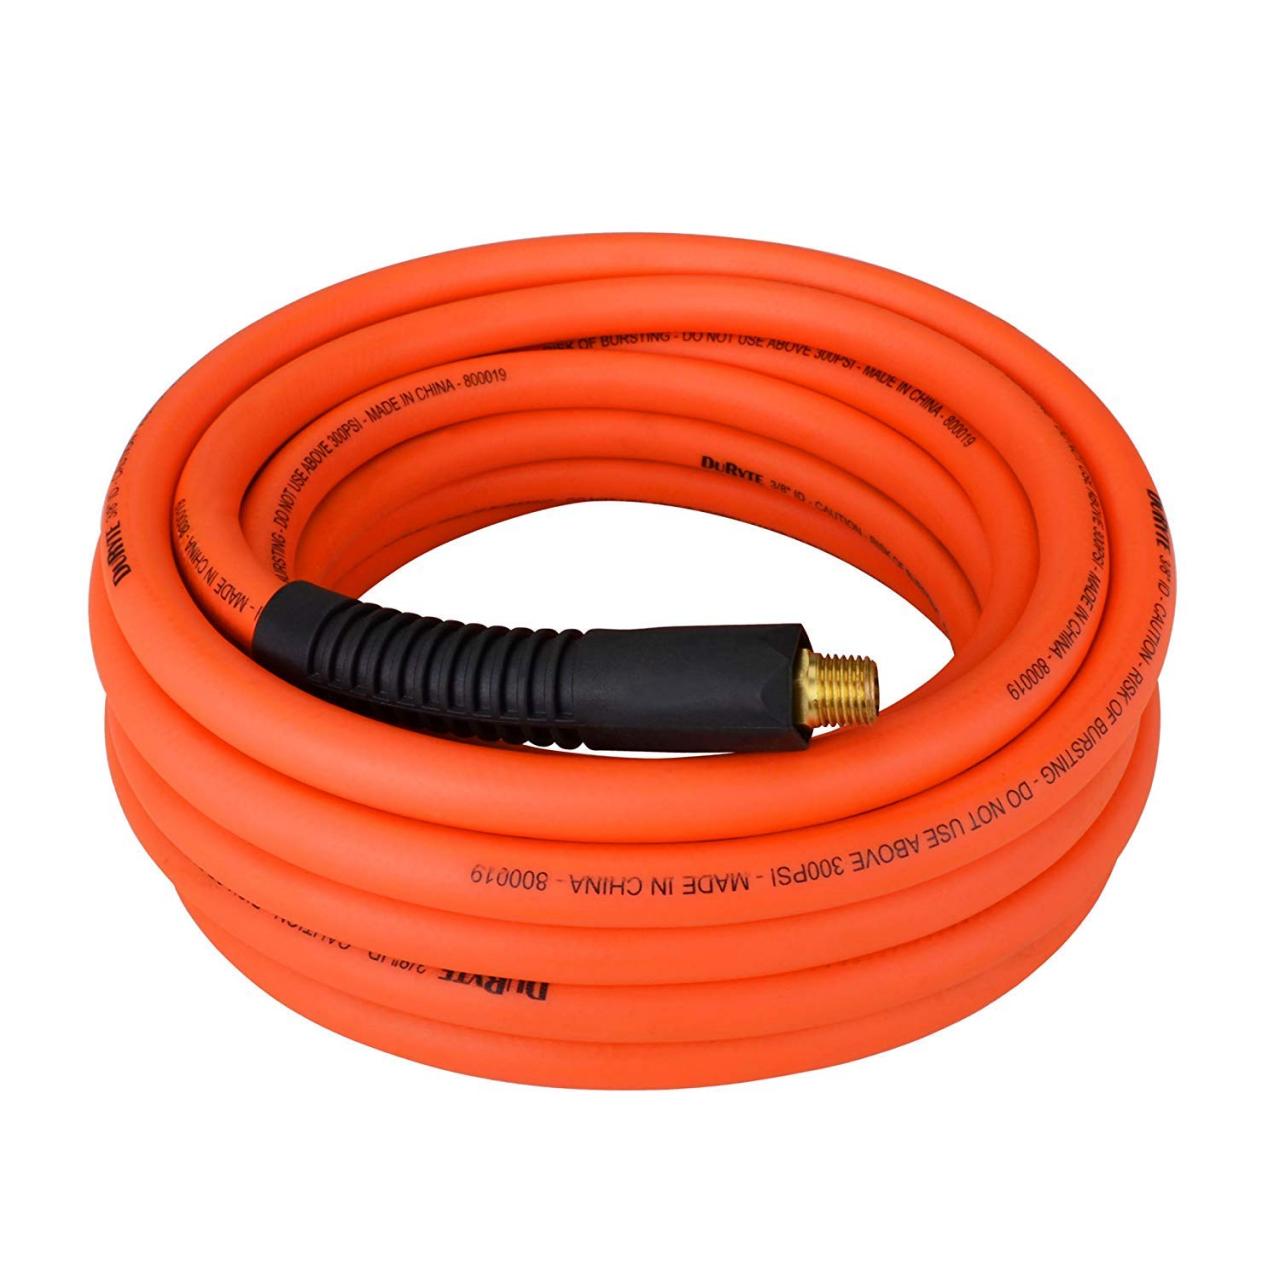 DuRyte Pro 300 PSI Hybrid (PVC/Rubber) Air Hose - 3/8-Inch by 25-Feet,  1/4-Inch MNPT Brass Ends, Heavy Duty, Light Weight, Lays Flat, Soft,  Non-Kinking, Extreme All-Weather Flexibility: Buy Online at Best Price